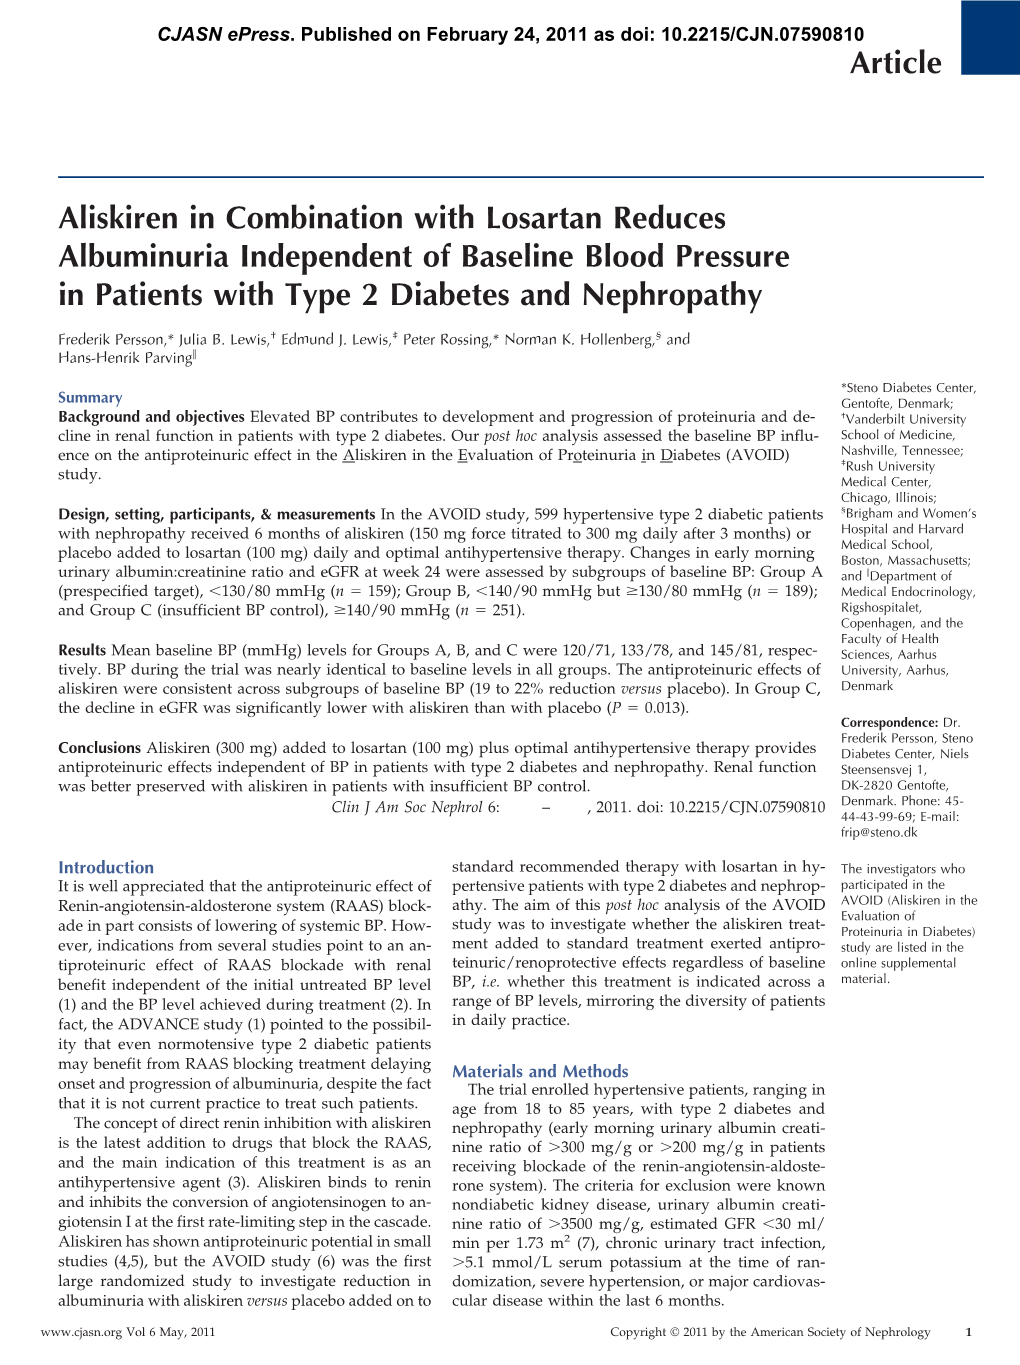 Aliskiren in Combination with Losartan Reduces Albuminuria Independent of Baseline Blood Pressure in Patients with Type 2 Diabetes and Nephropathy